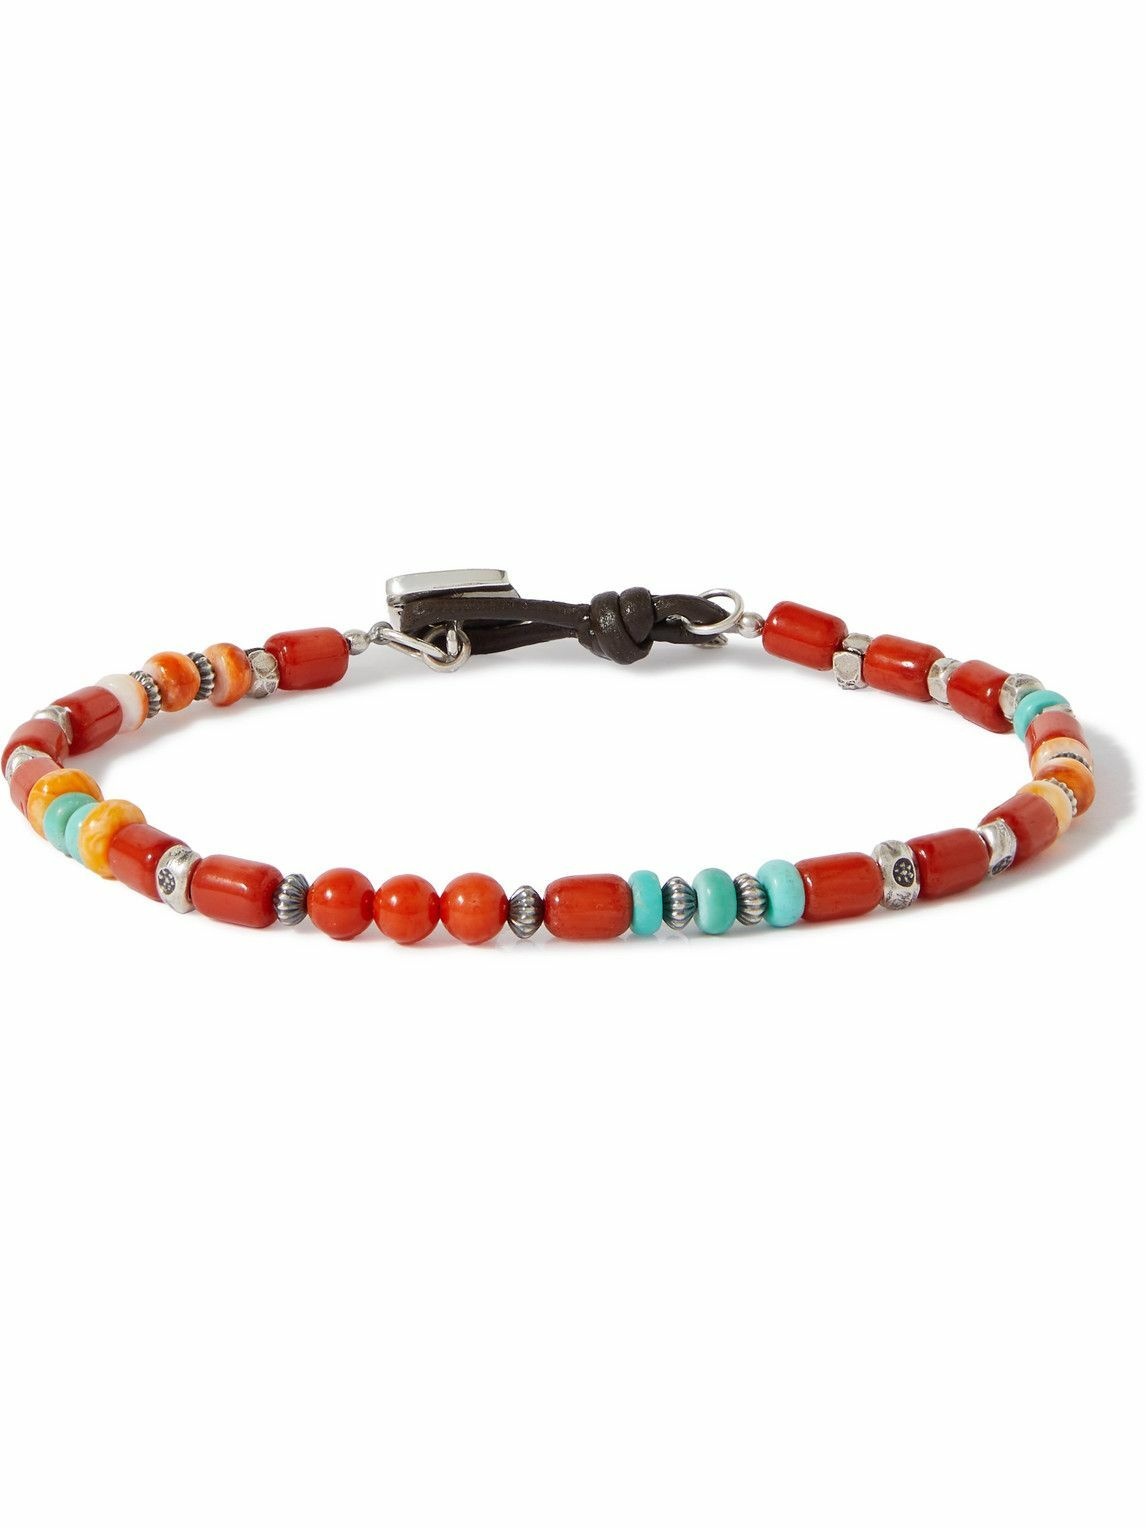 Photo: Peyote Bird - Coral Fire Silver and Leather Multi-Stone Beaded Bracelet